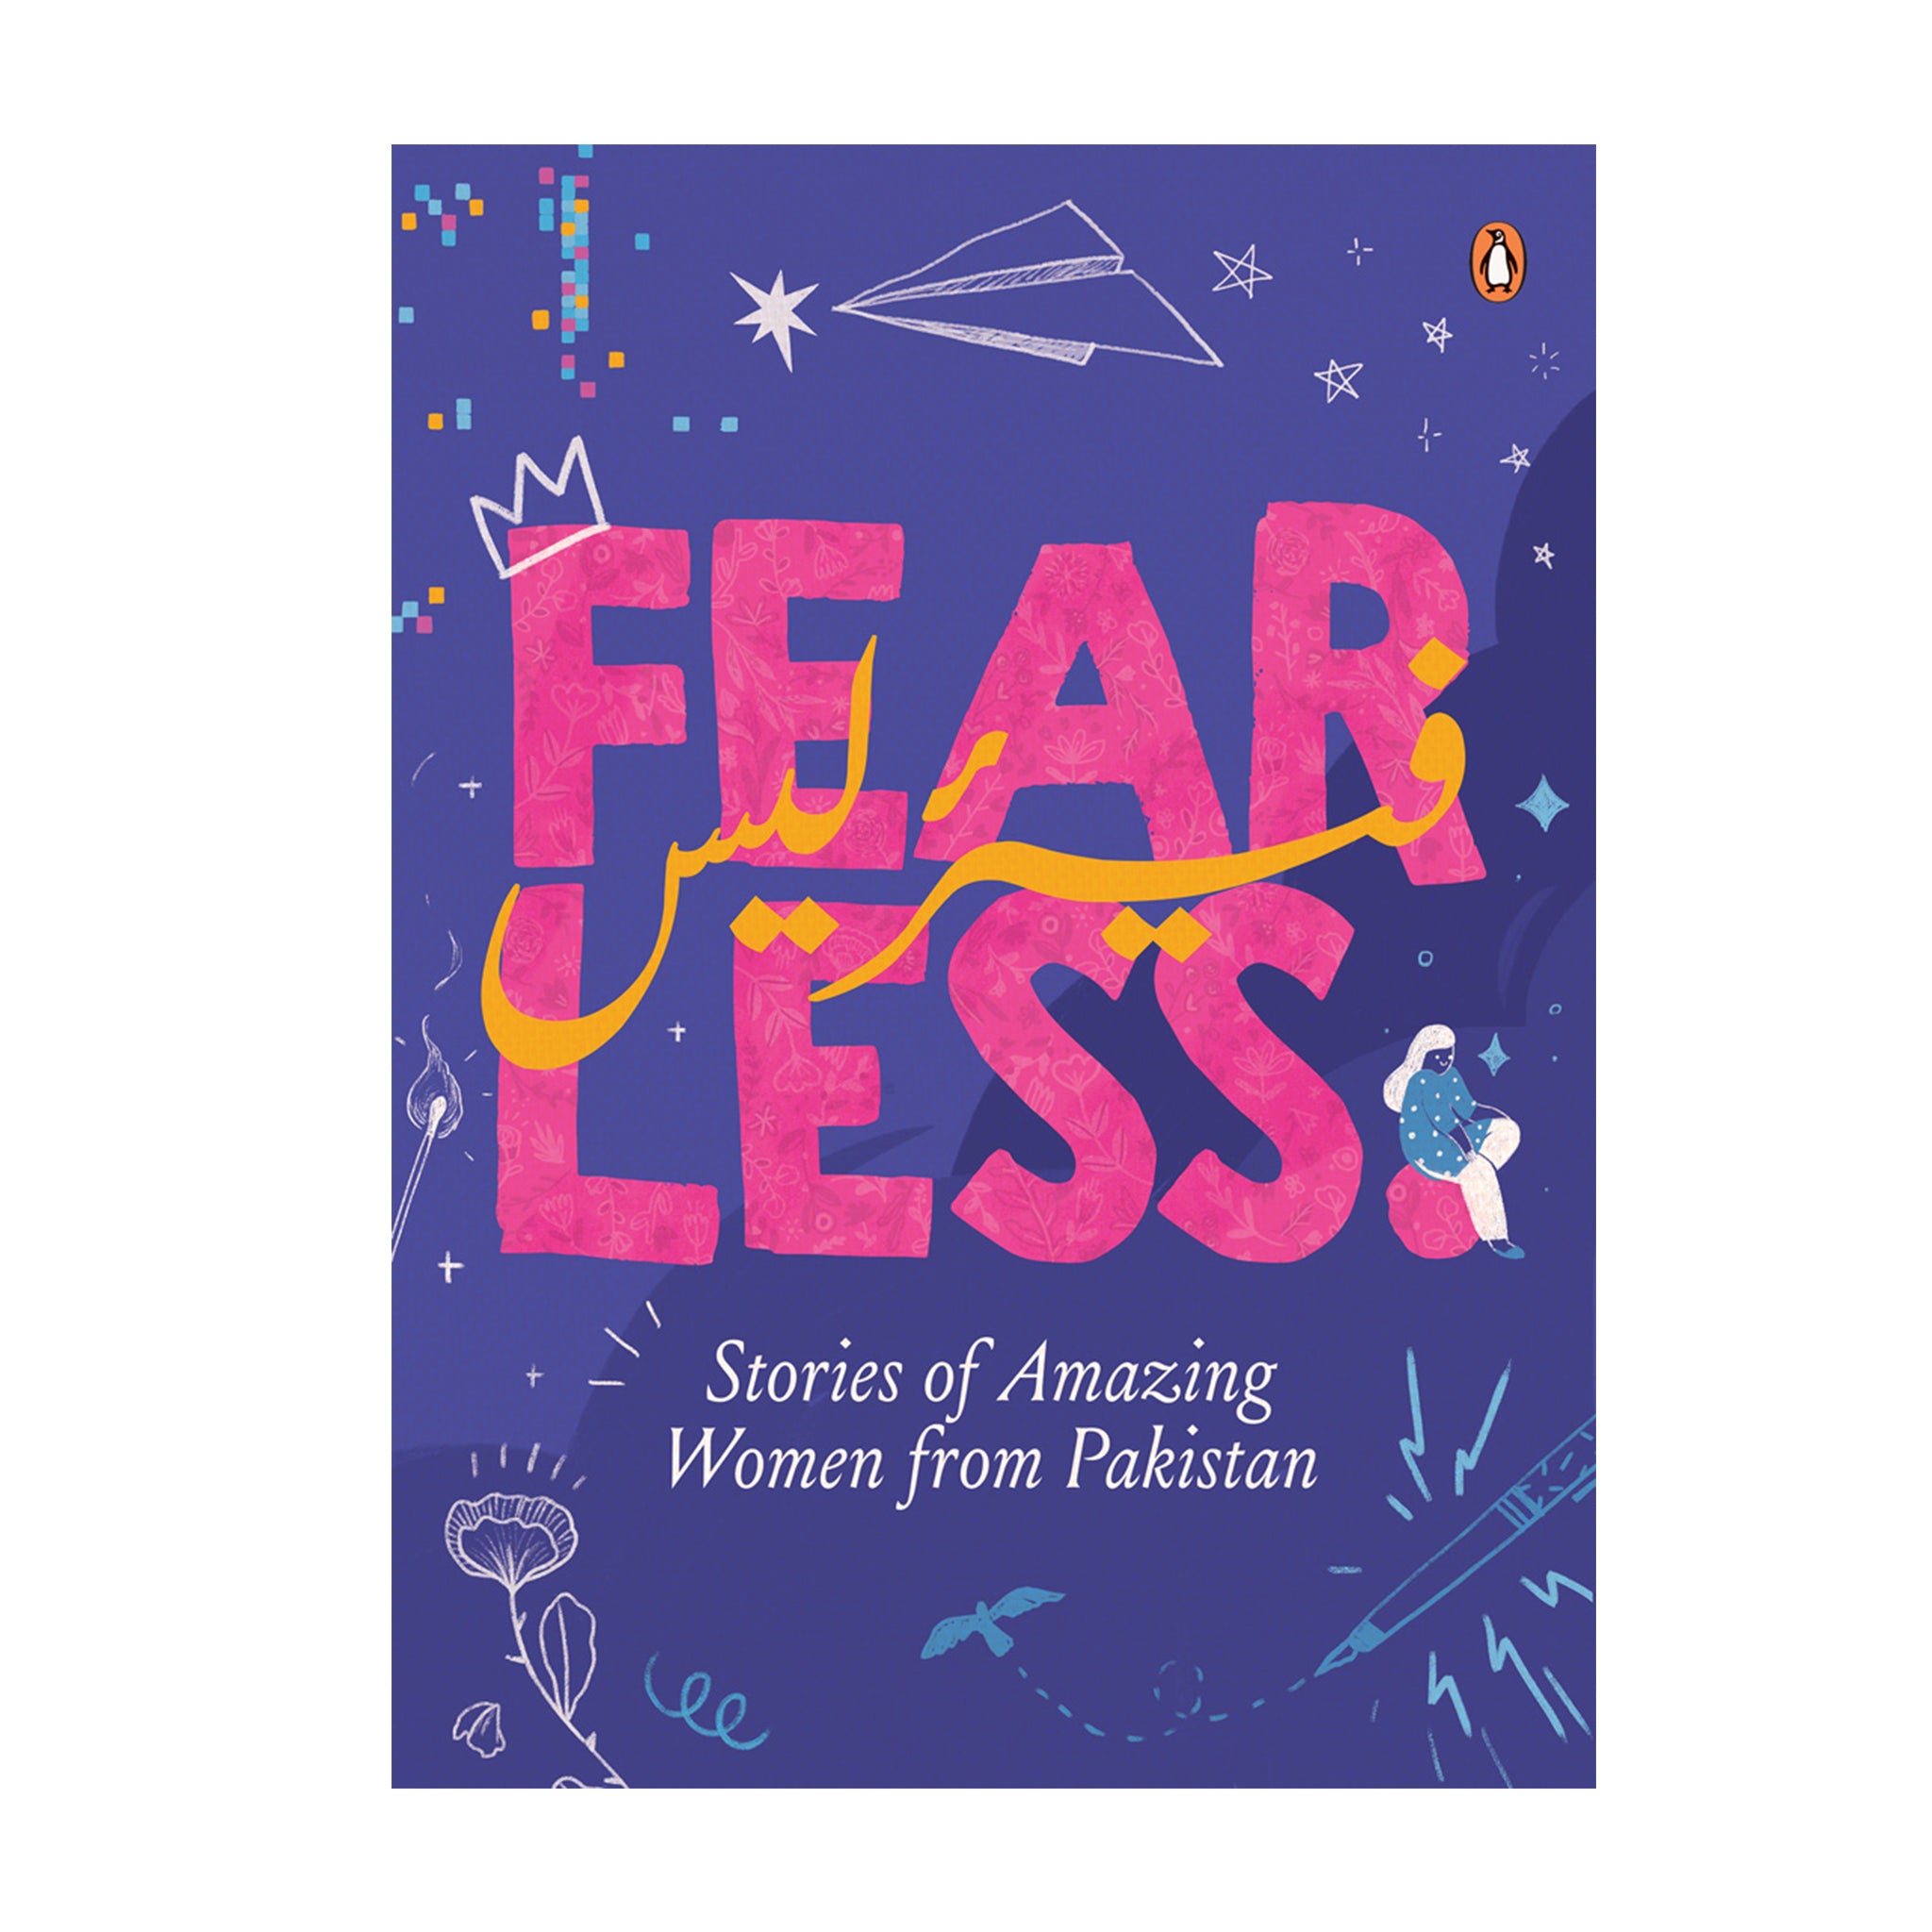 Fearless stories of amazing women from Pakistan